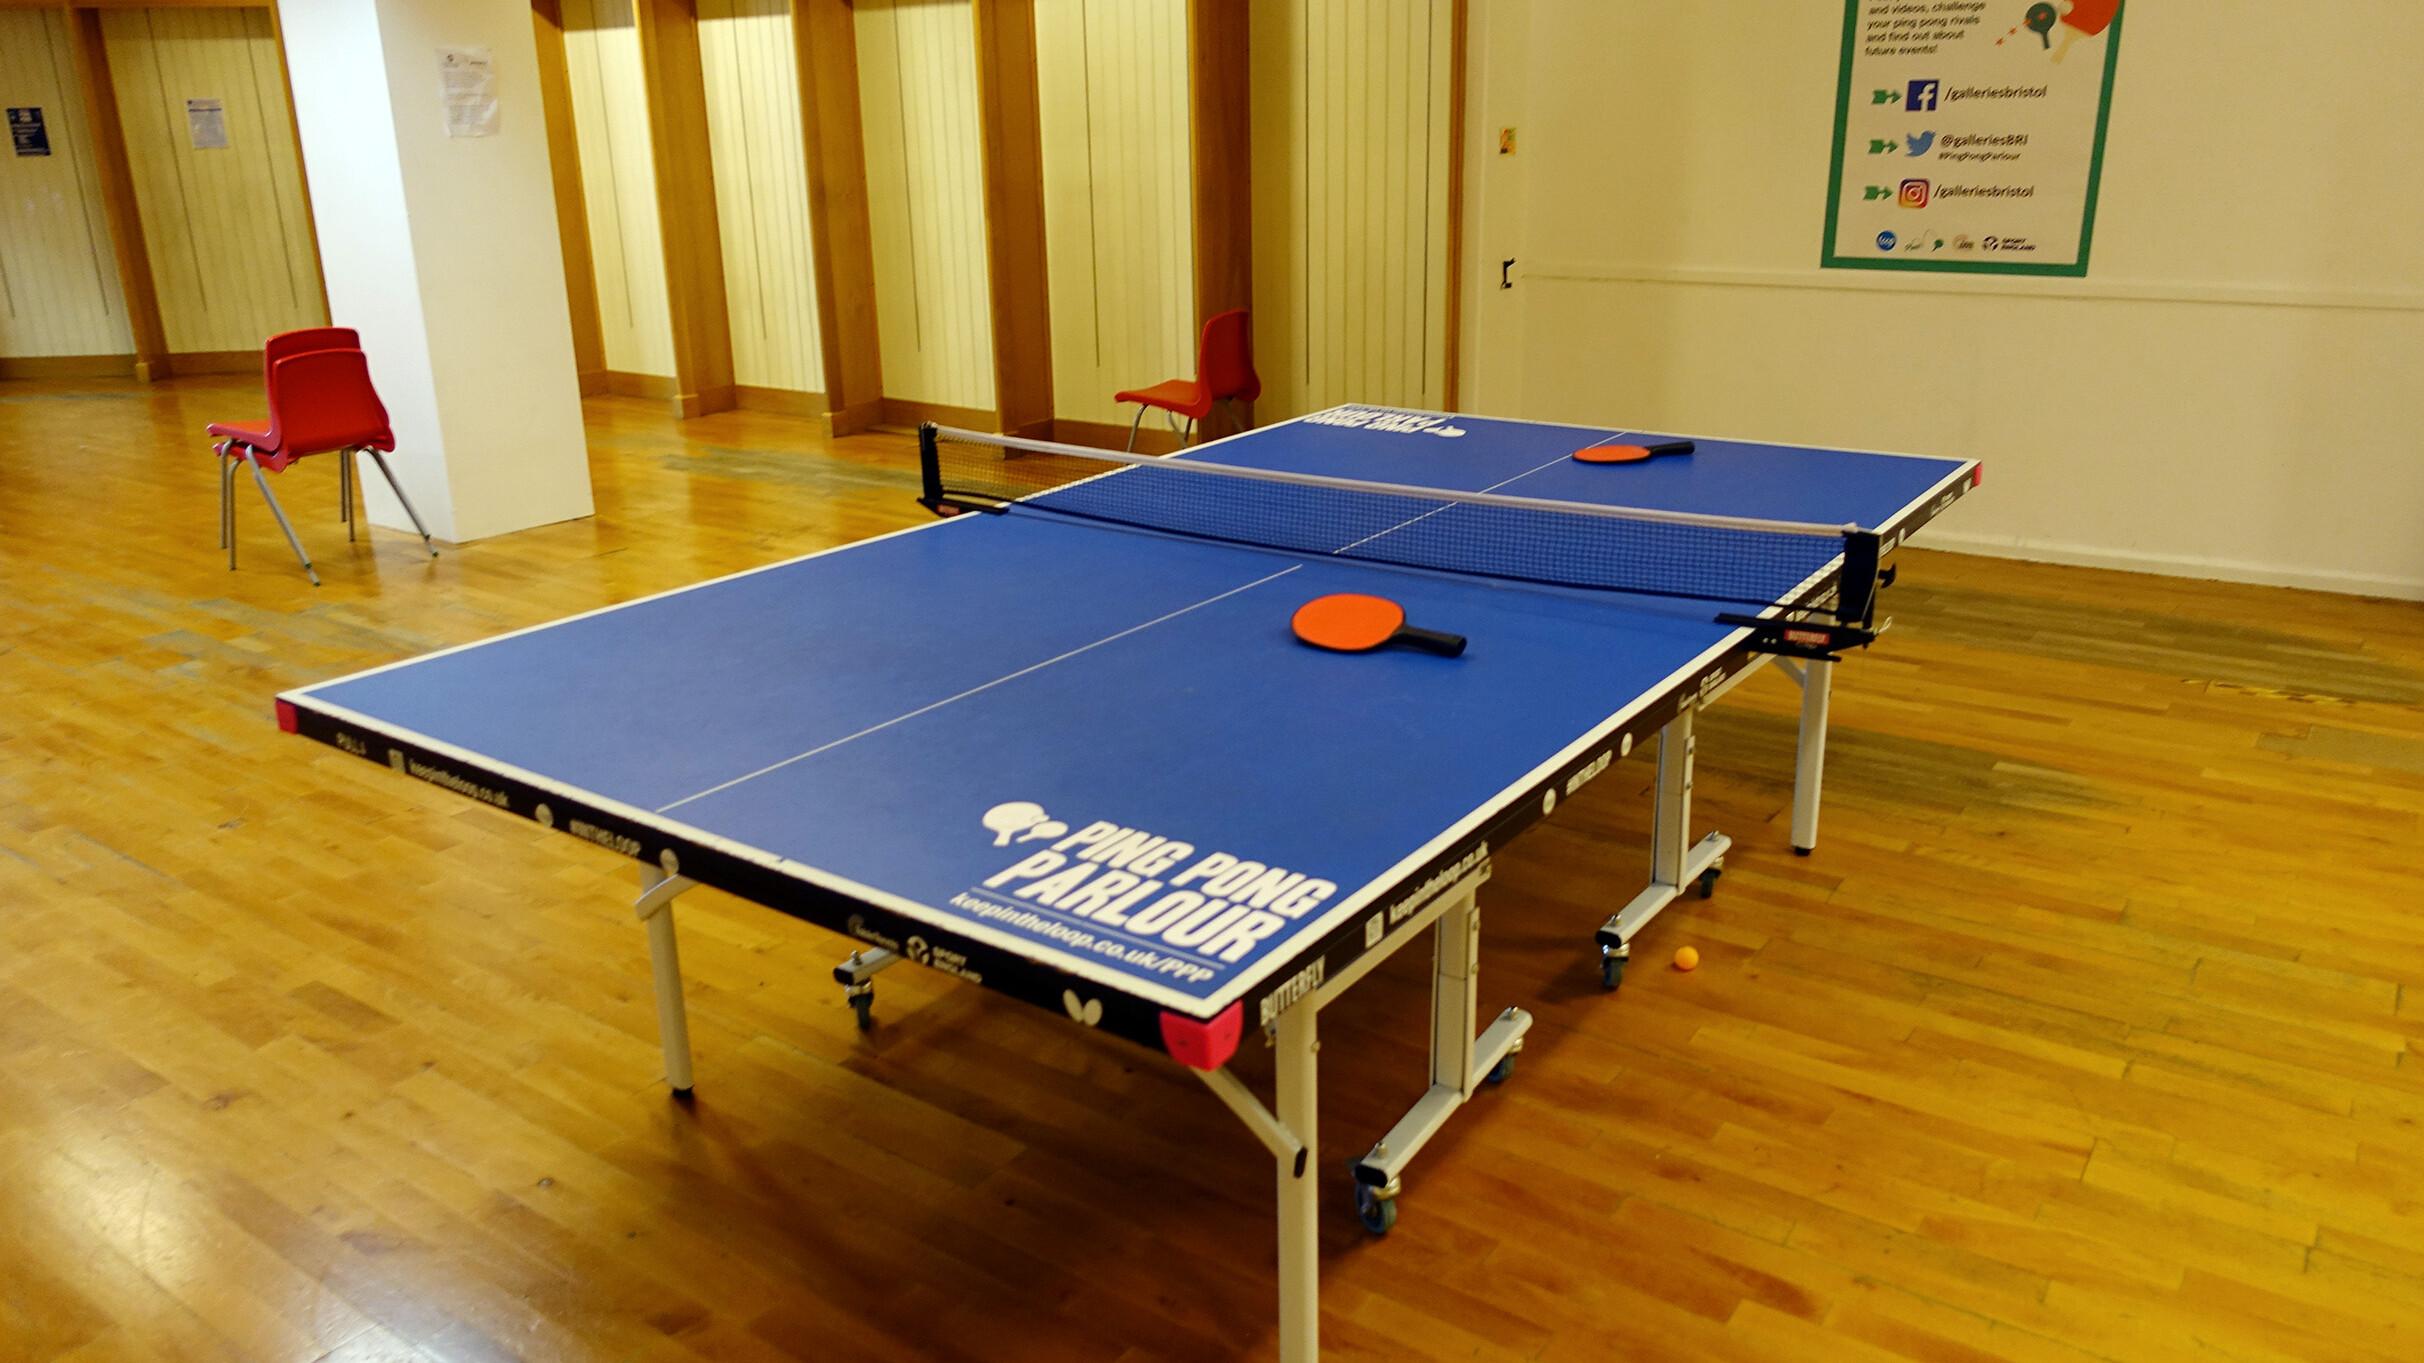 Rentable table tennis game set up inside for an event.